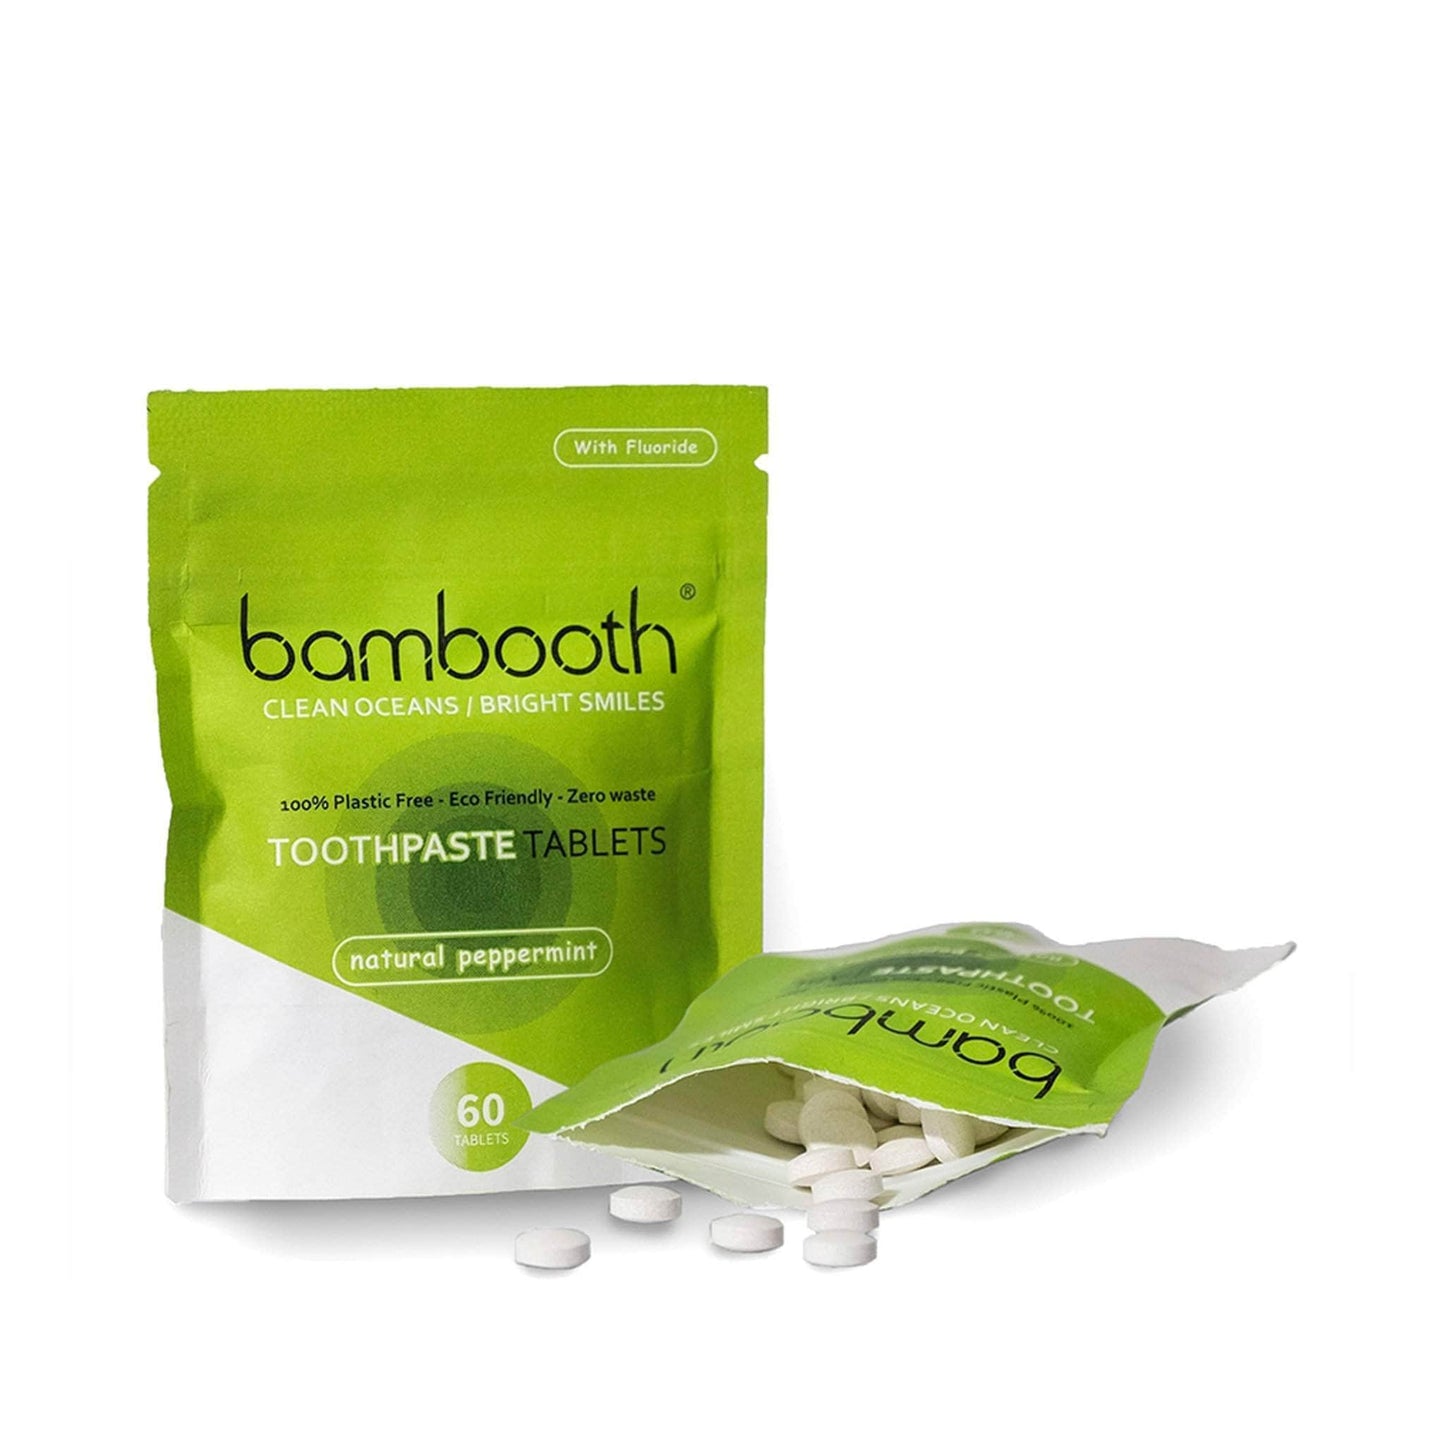 Bambooth Toothpaste Toothpaste Tablets - 60 Peppermint Tabs with Flouride - Bambooth